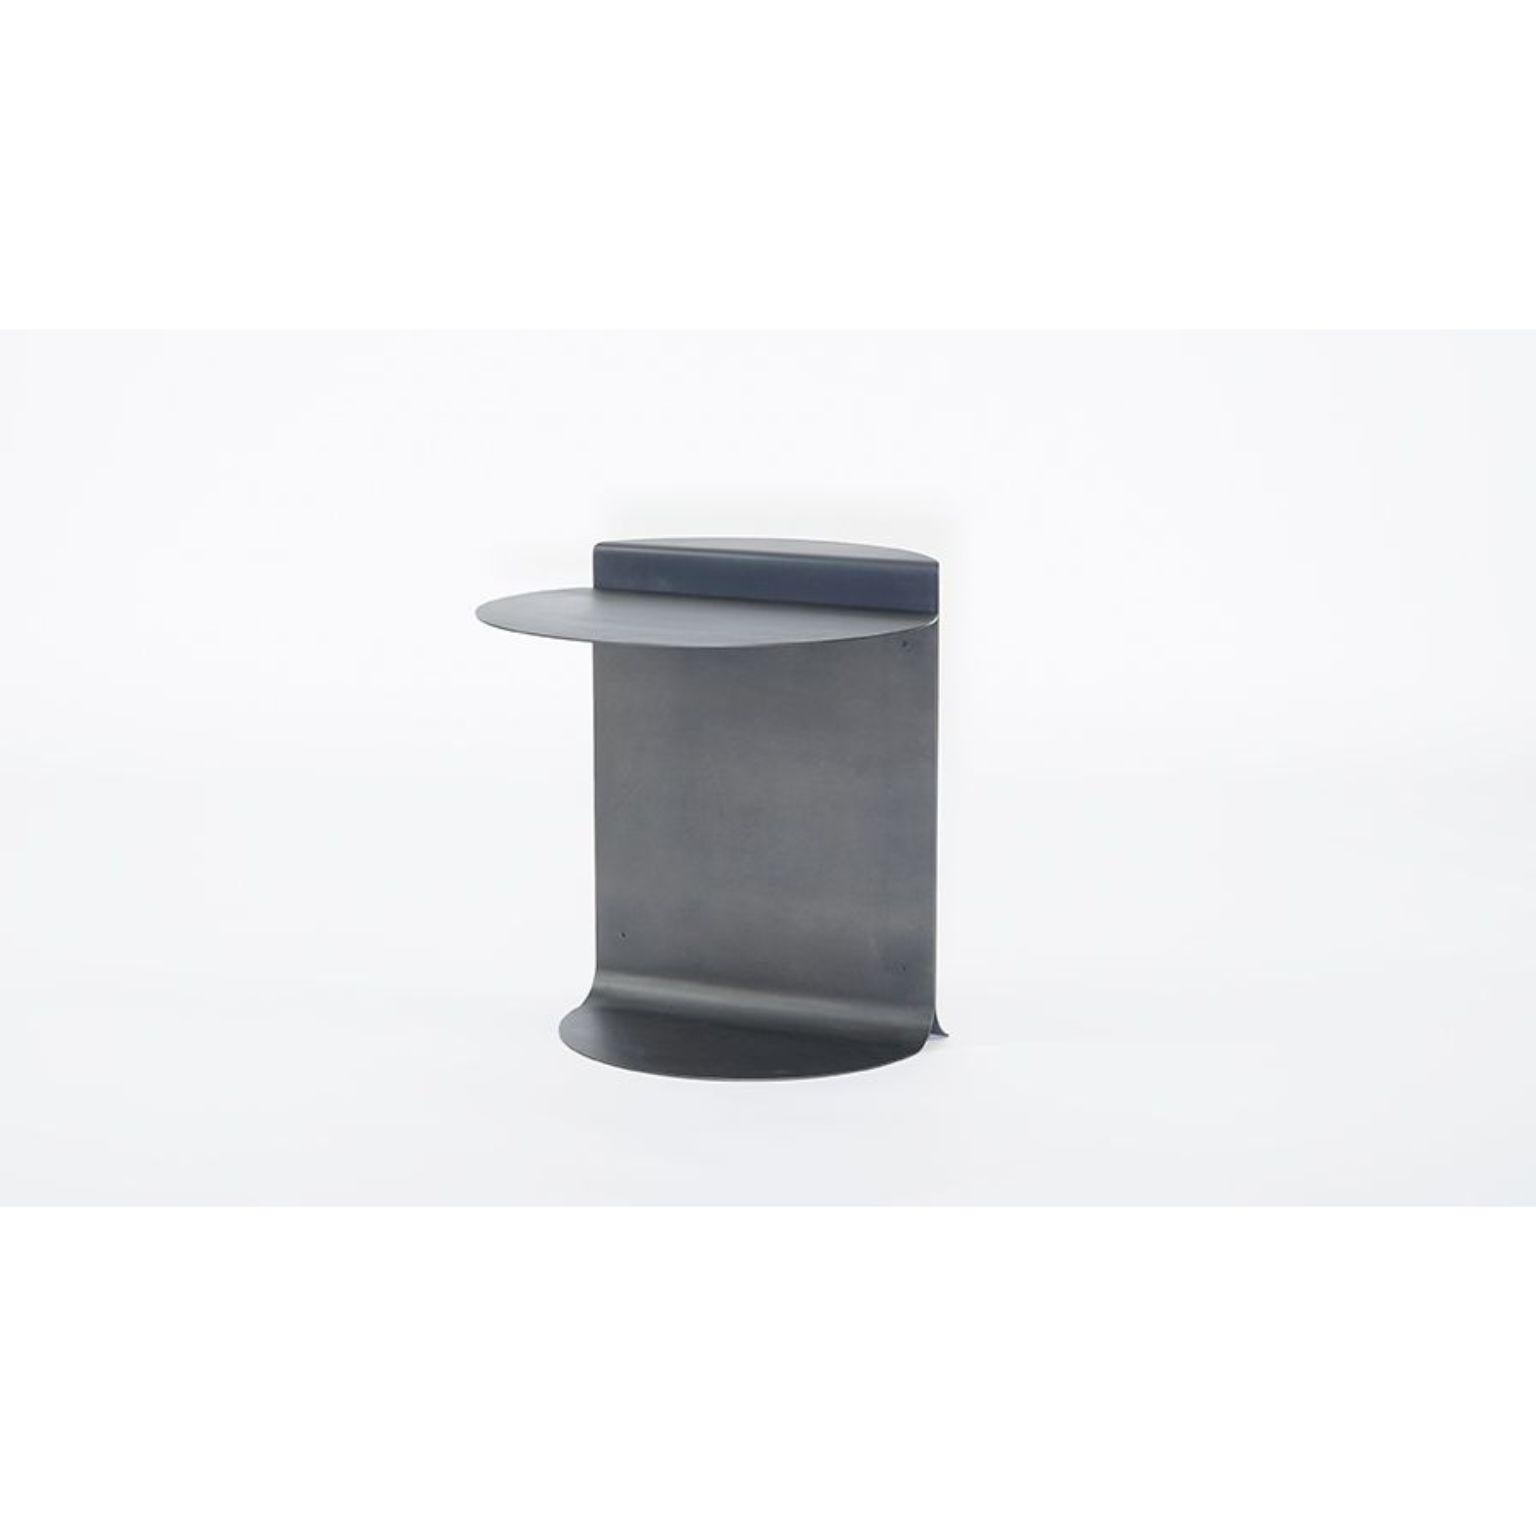 O Tabe by Estudio Persona
Dimensions: W 50.8 x D 50.8 x H 53.4 cm
Materials: Blackened stainless steel

Side table in blackened stainless steel or powder coated steel.
Outdoor version available in stainless steel with polyurethane